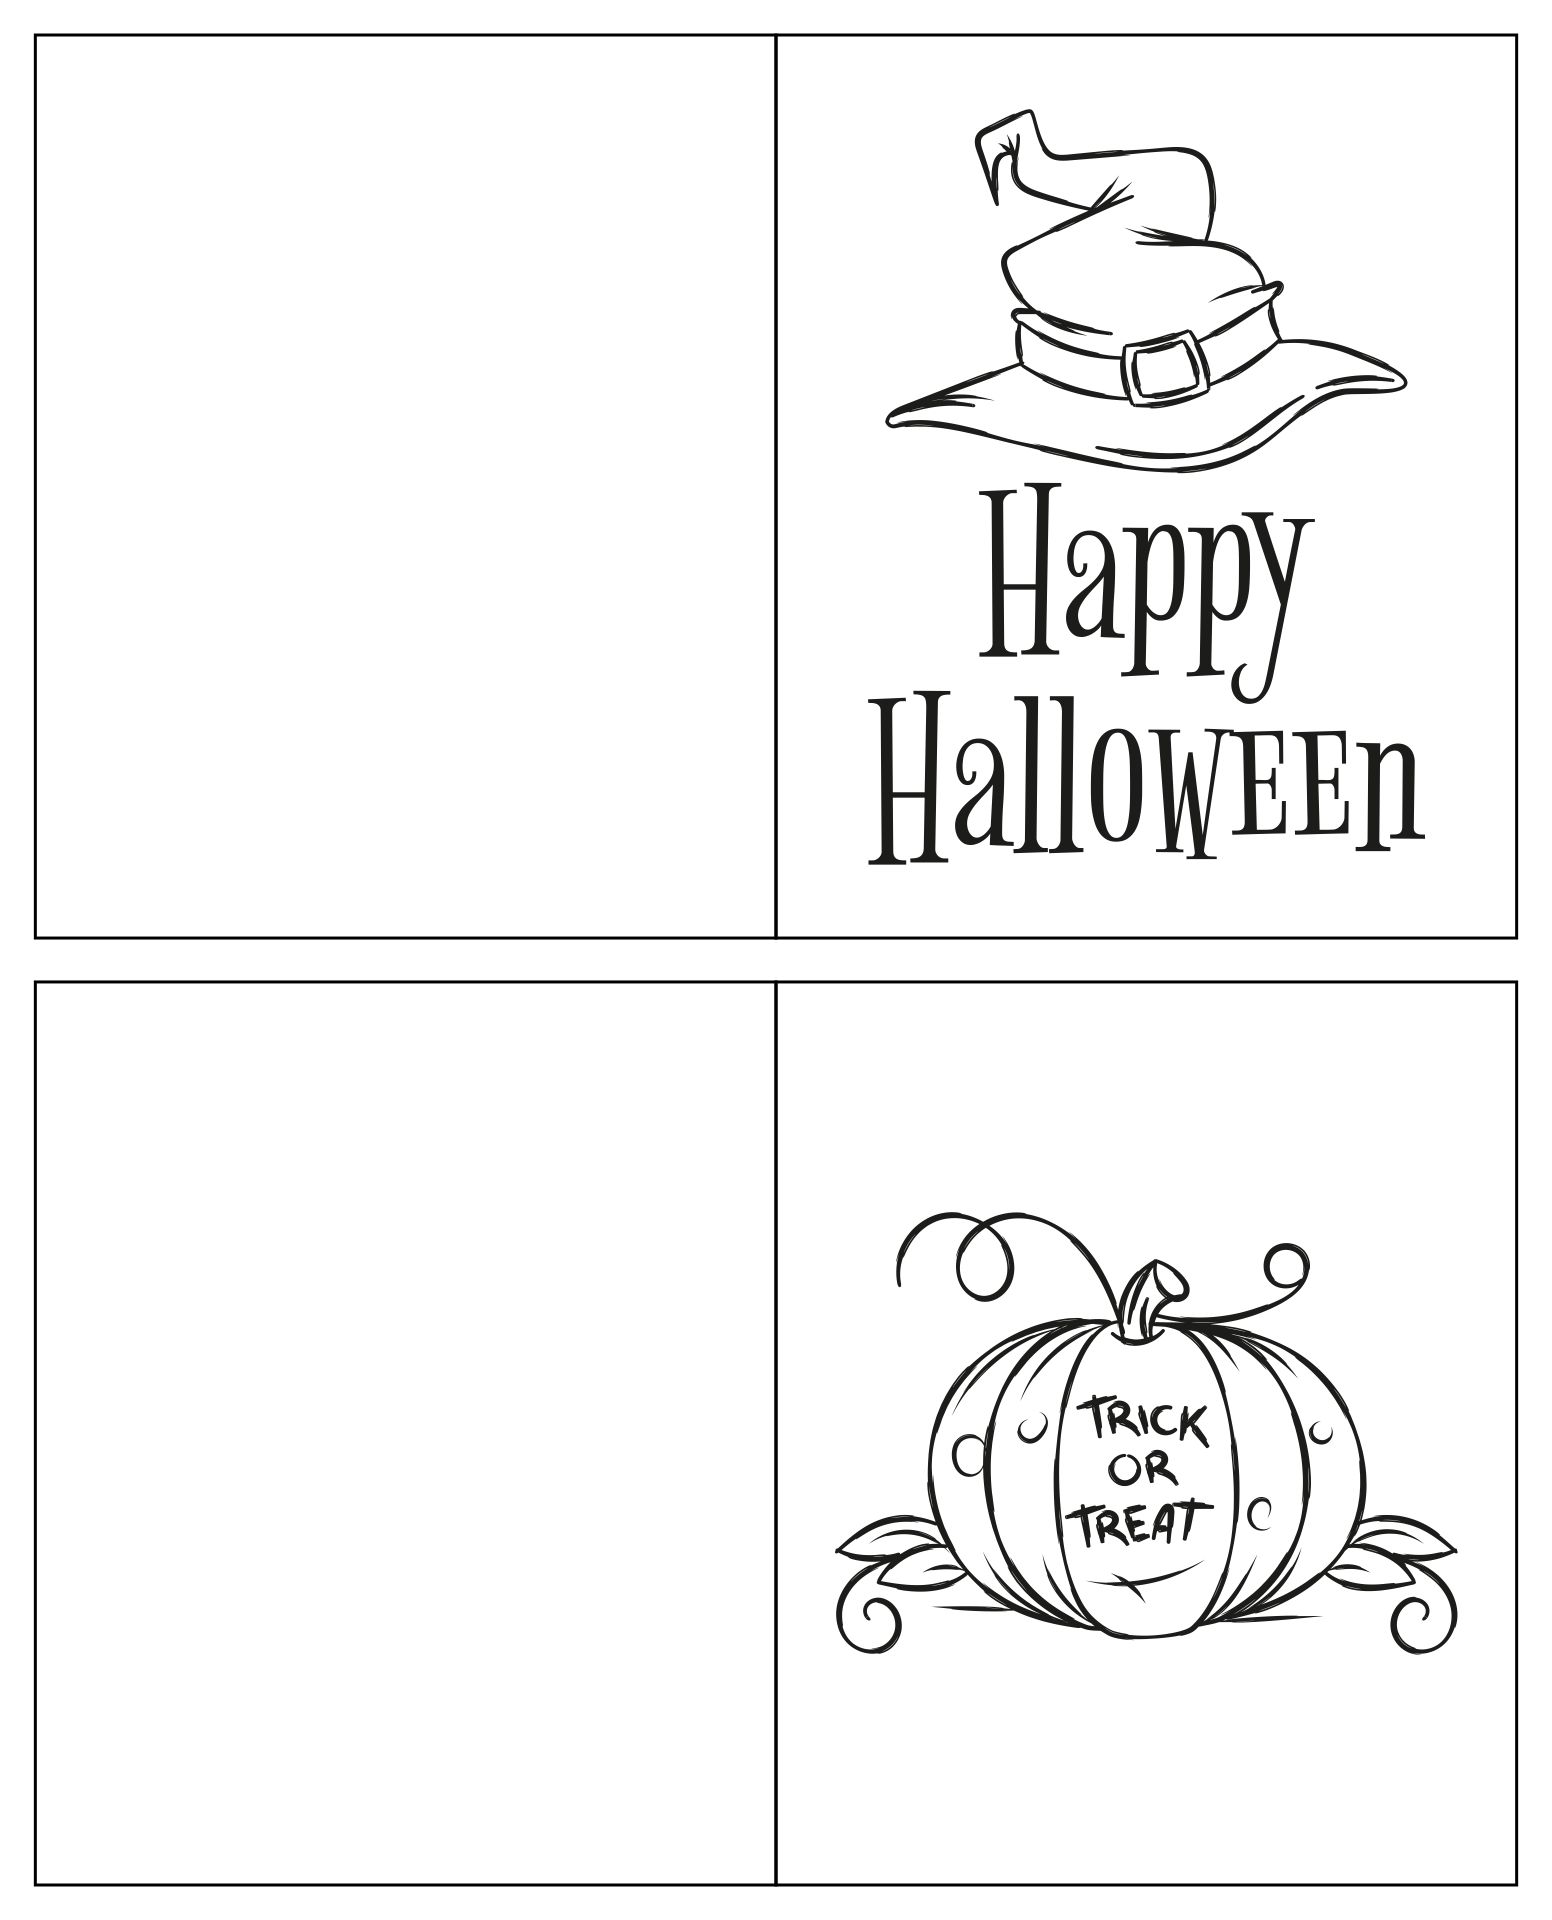 Halloween Printable Cards In Black And White